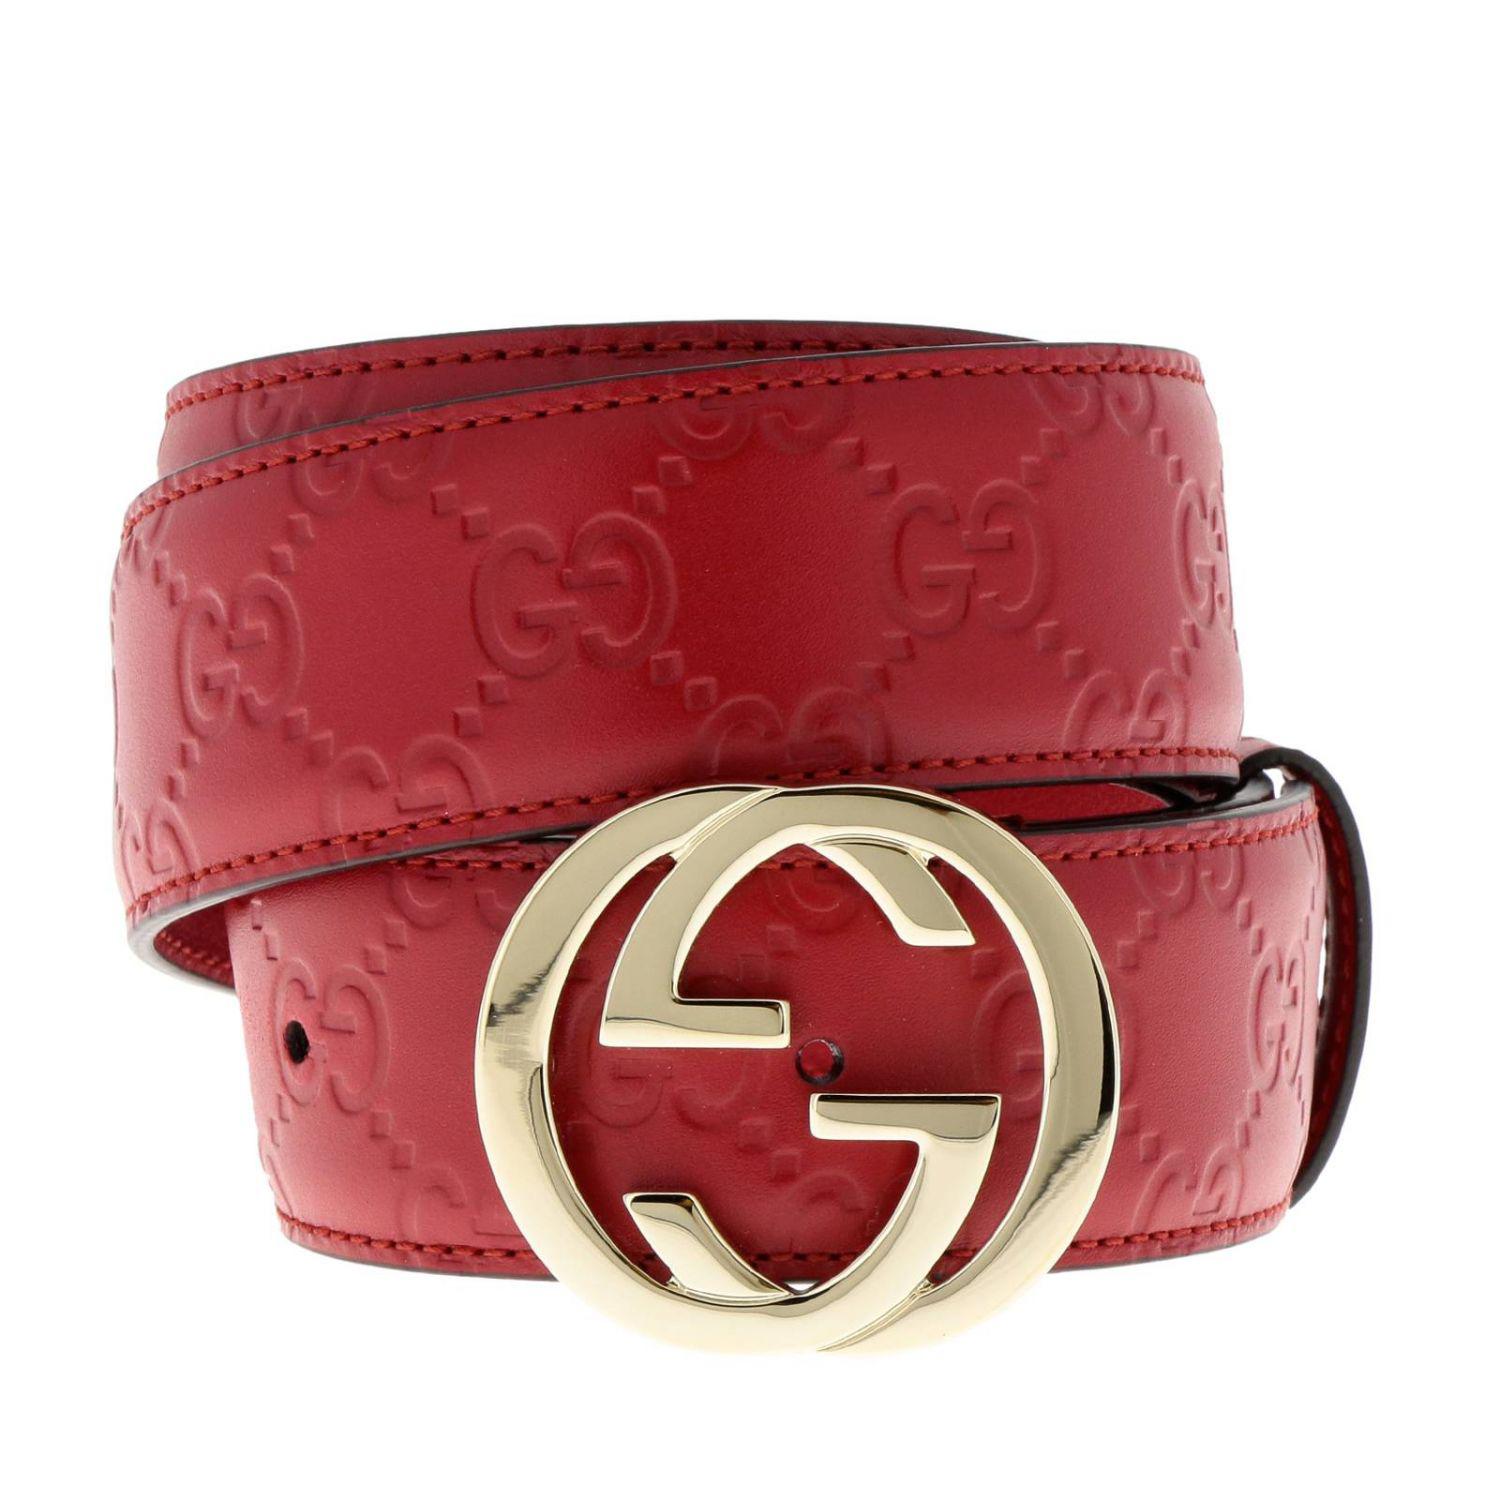 Gucci Women's Belt ($265) ❤ liked on Polyvore featuring accessories, belts,  red, gucci, red belt and gucci belt